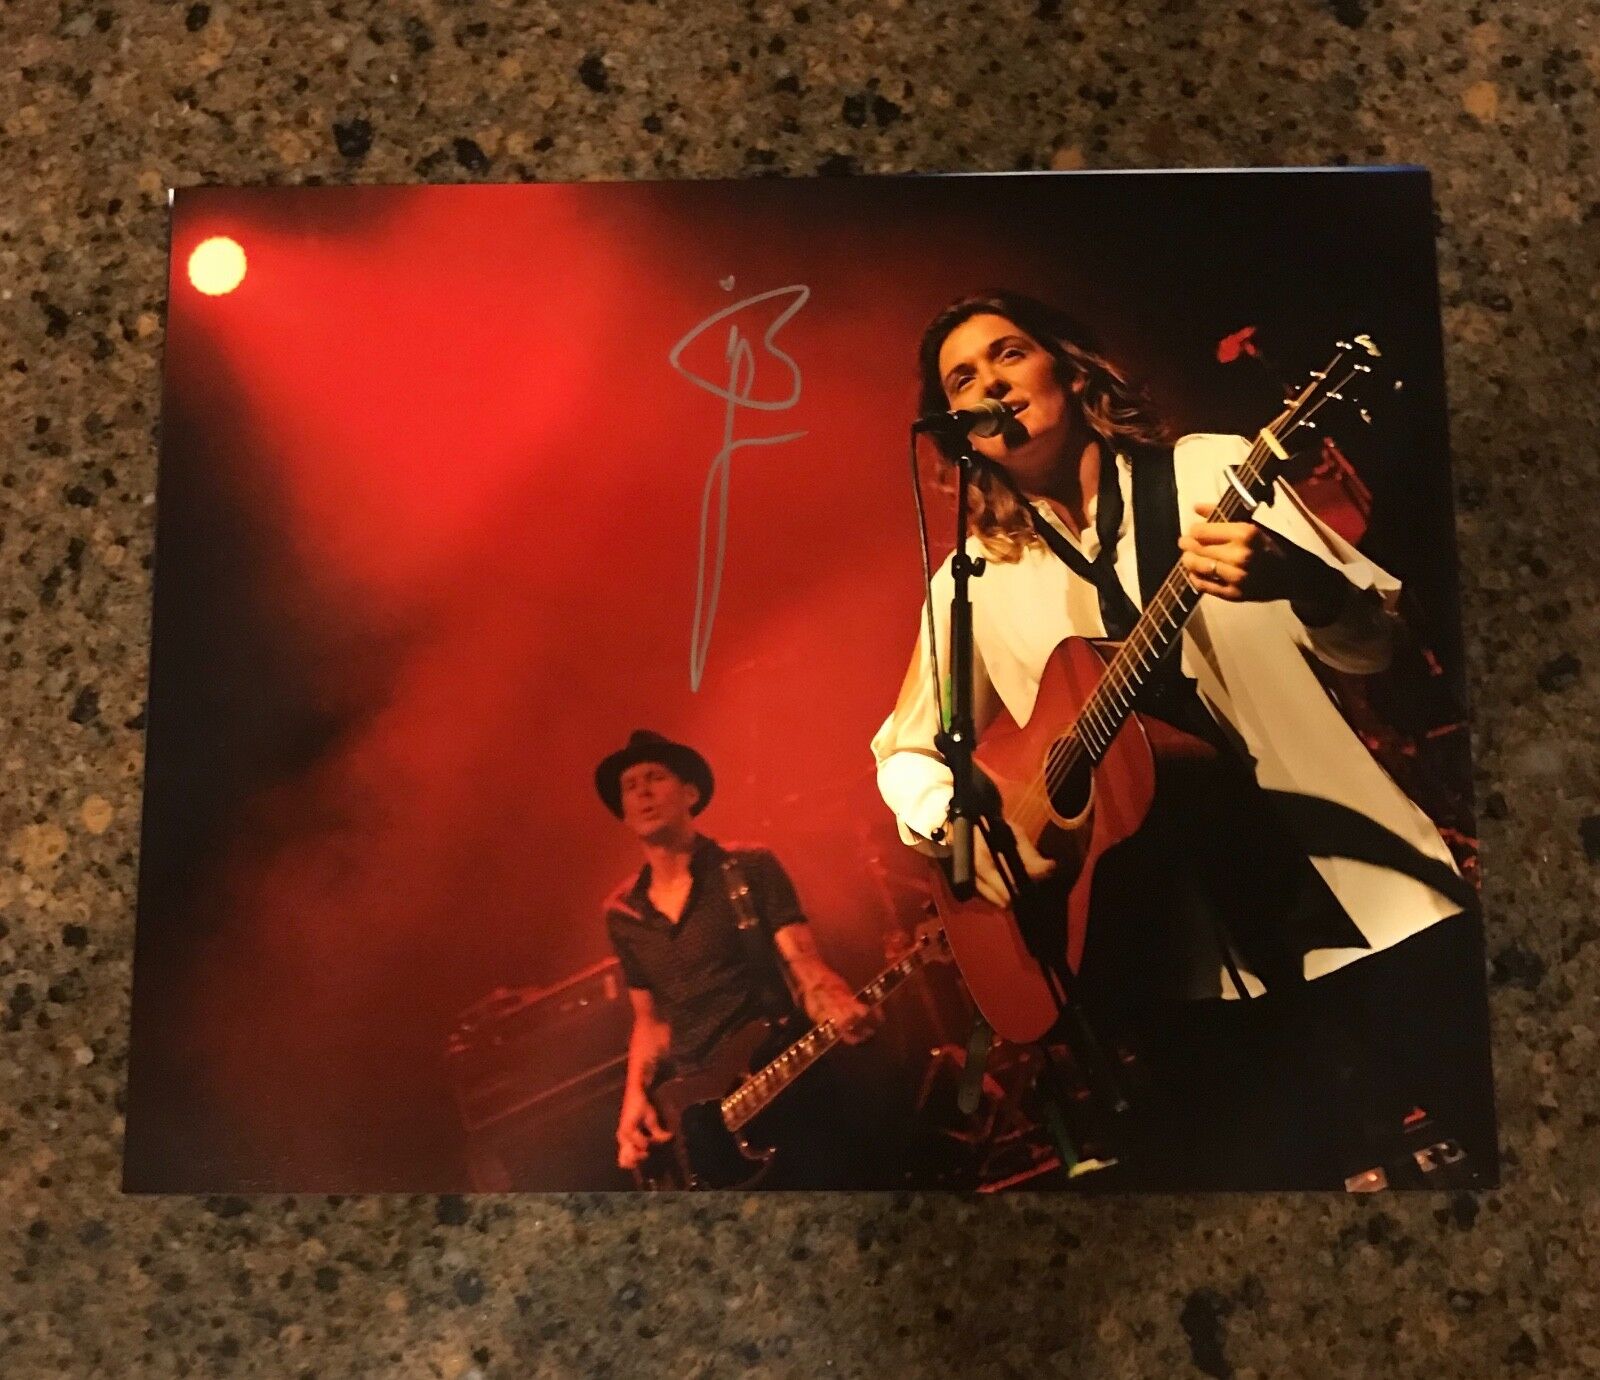 * BRANDI CARLILE * signed autographed 11x14 Photo Poster painting * THE STORY * THAT WASNT ME 5